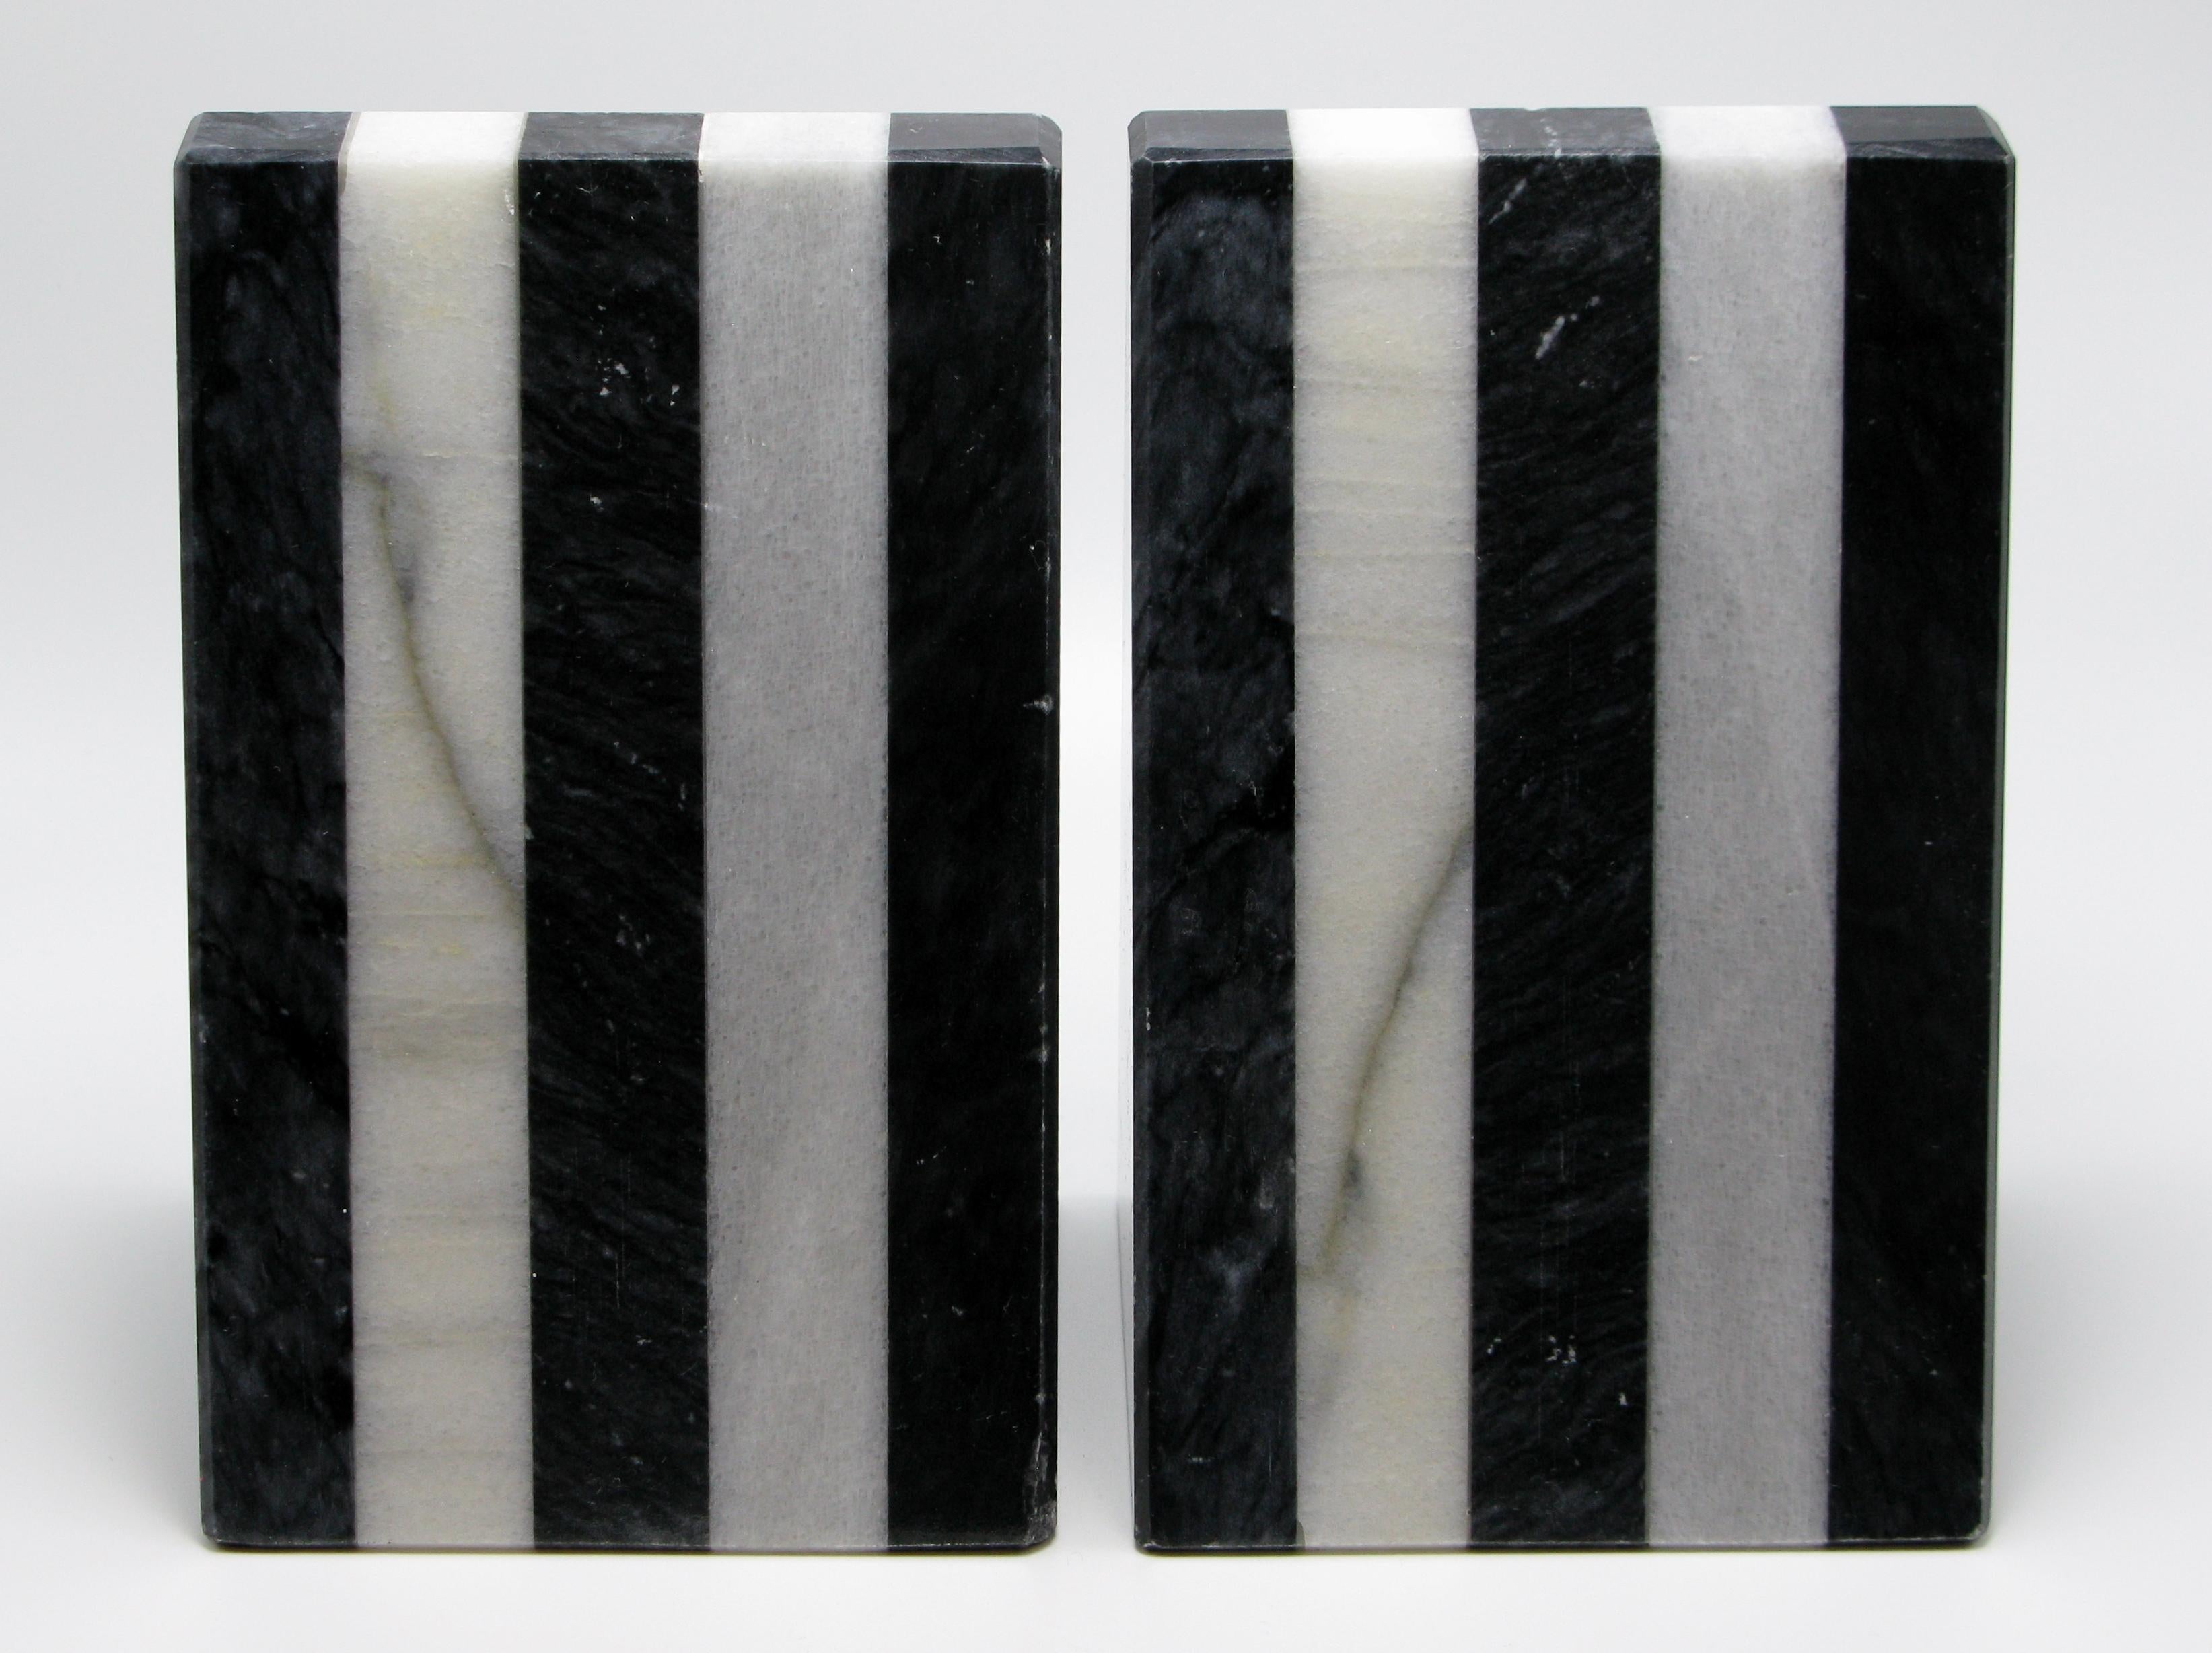 Pair of black and white stripe marble bookends. Italy, circa 1980s.
Each bookend measures 5.9